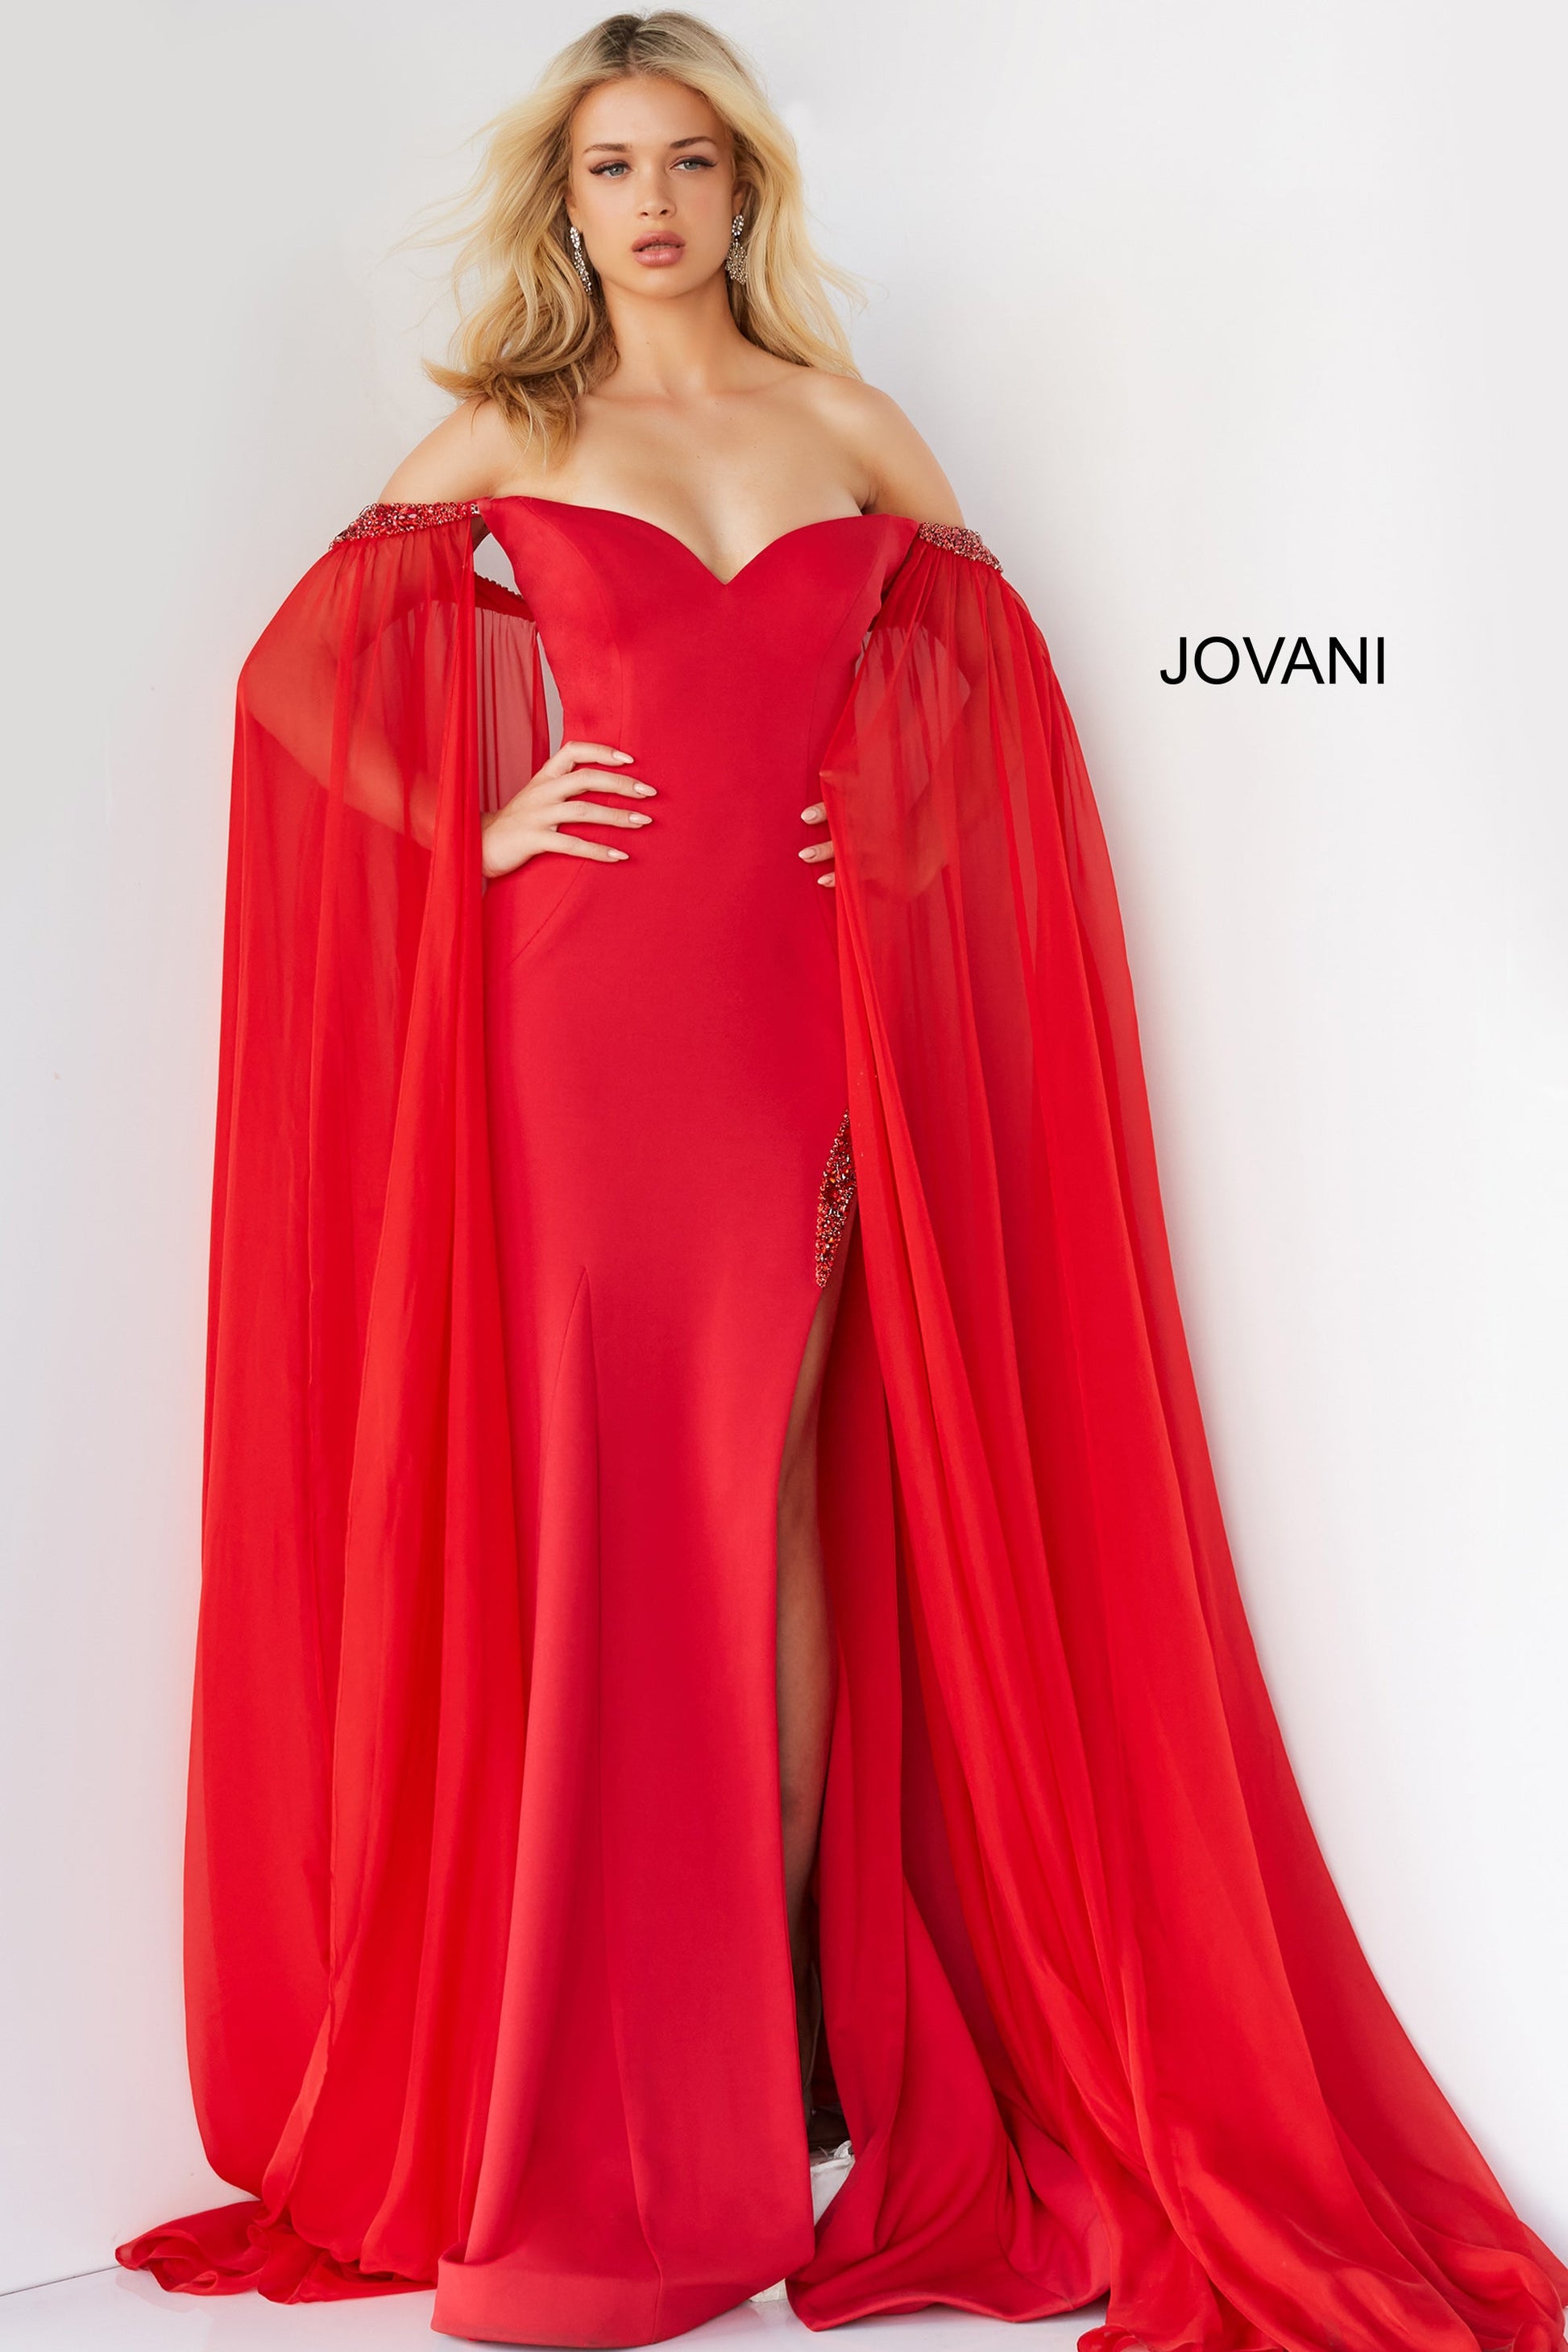 Jovani 07652 Prom Dress Cape Sleeves Pageant Gown.  This is a strapless prom dress with flattering fitted silhouette with an off-the-shoulder sweetheart neckline. It has  beaded chiffon around the arms with long sheer sweeping chiffon Cape Sleeves.  Excellent choice for Pageants.